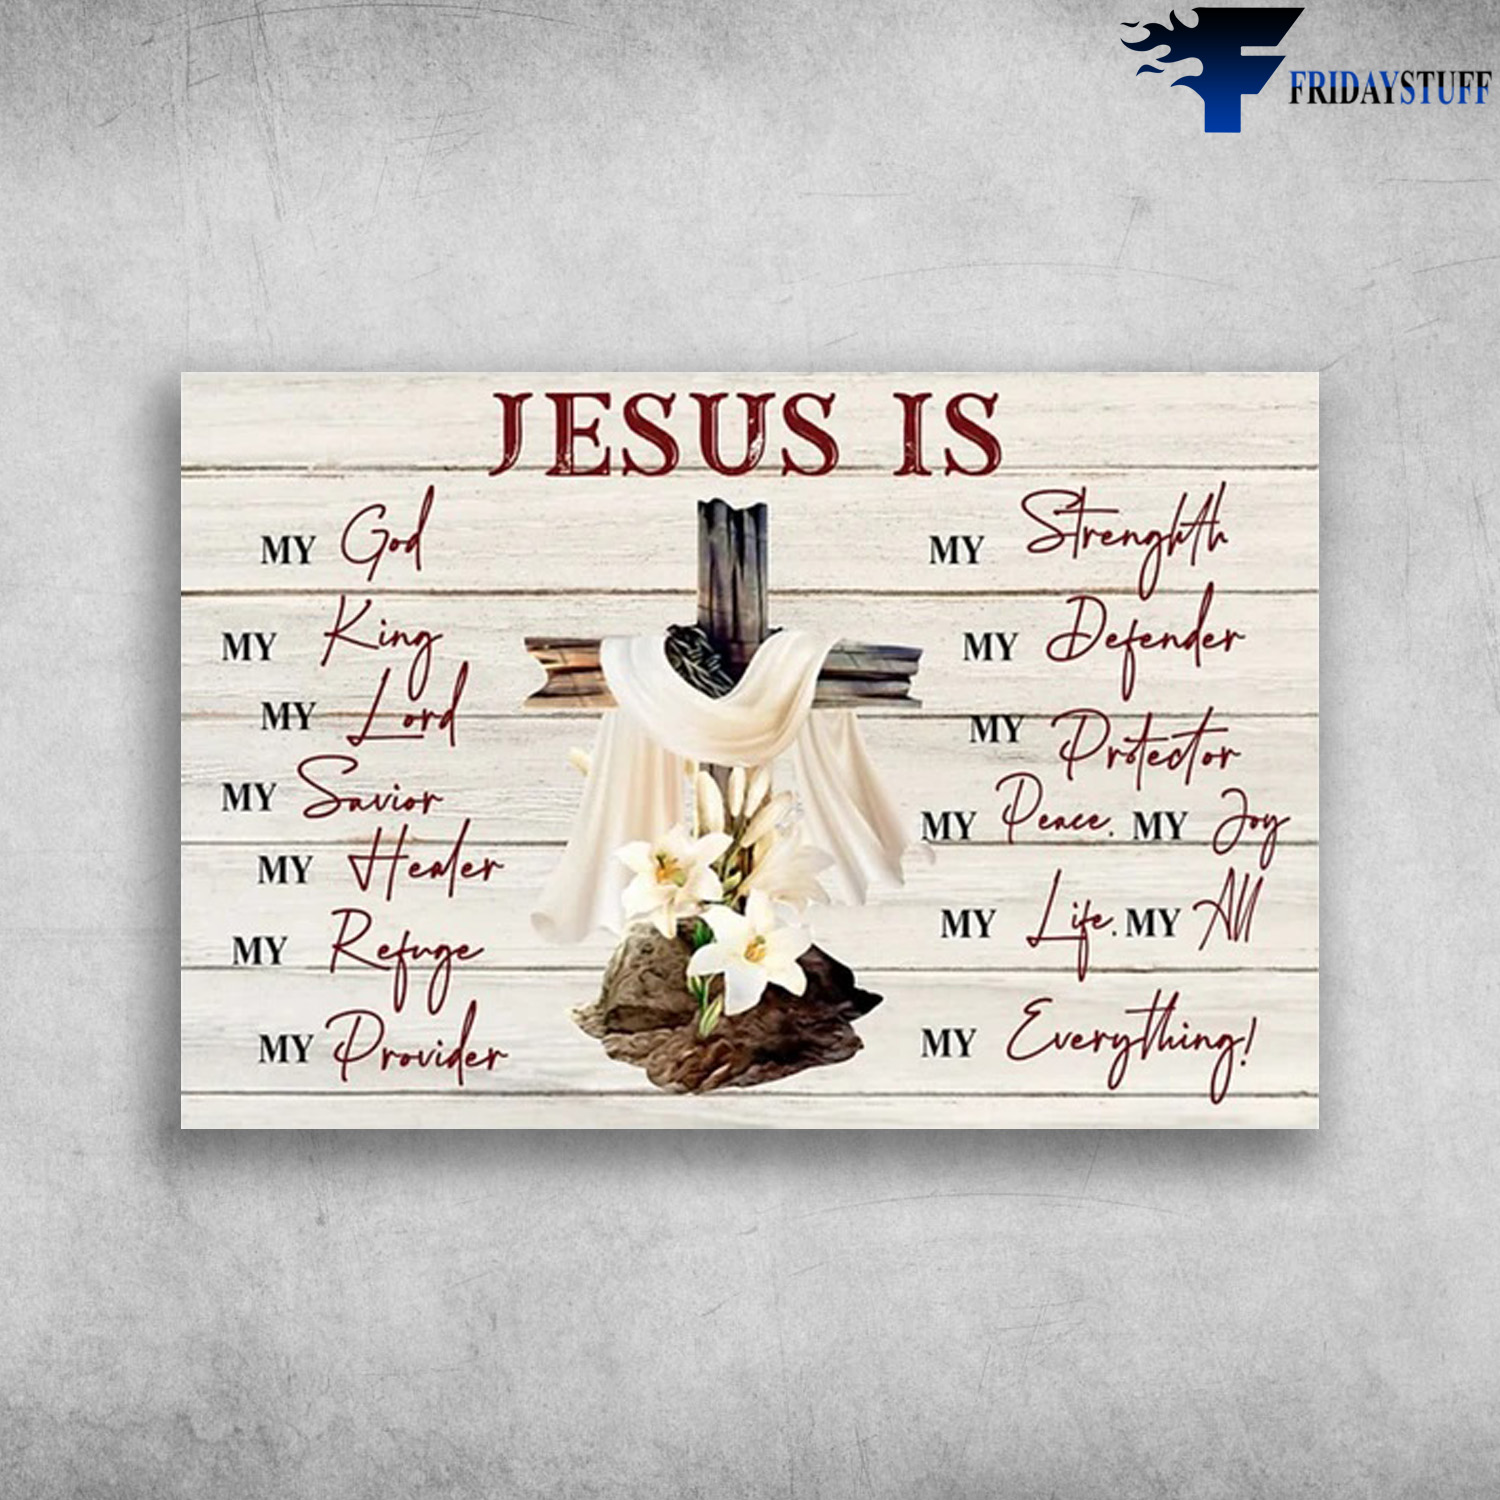 The Cross - Jesus Is My God, My Kind, My Lord, My Savior, My Healer, My Refeuge, My Provider, My Strength, My Defender, My Protector, My Peace, My Joy, My Life, My All, My Everything